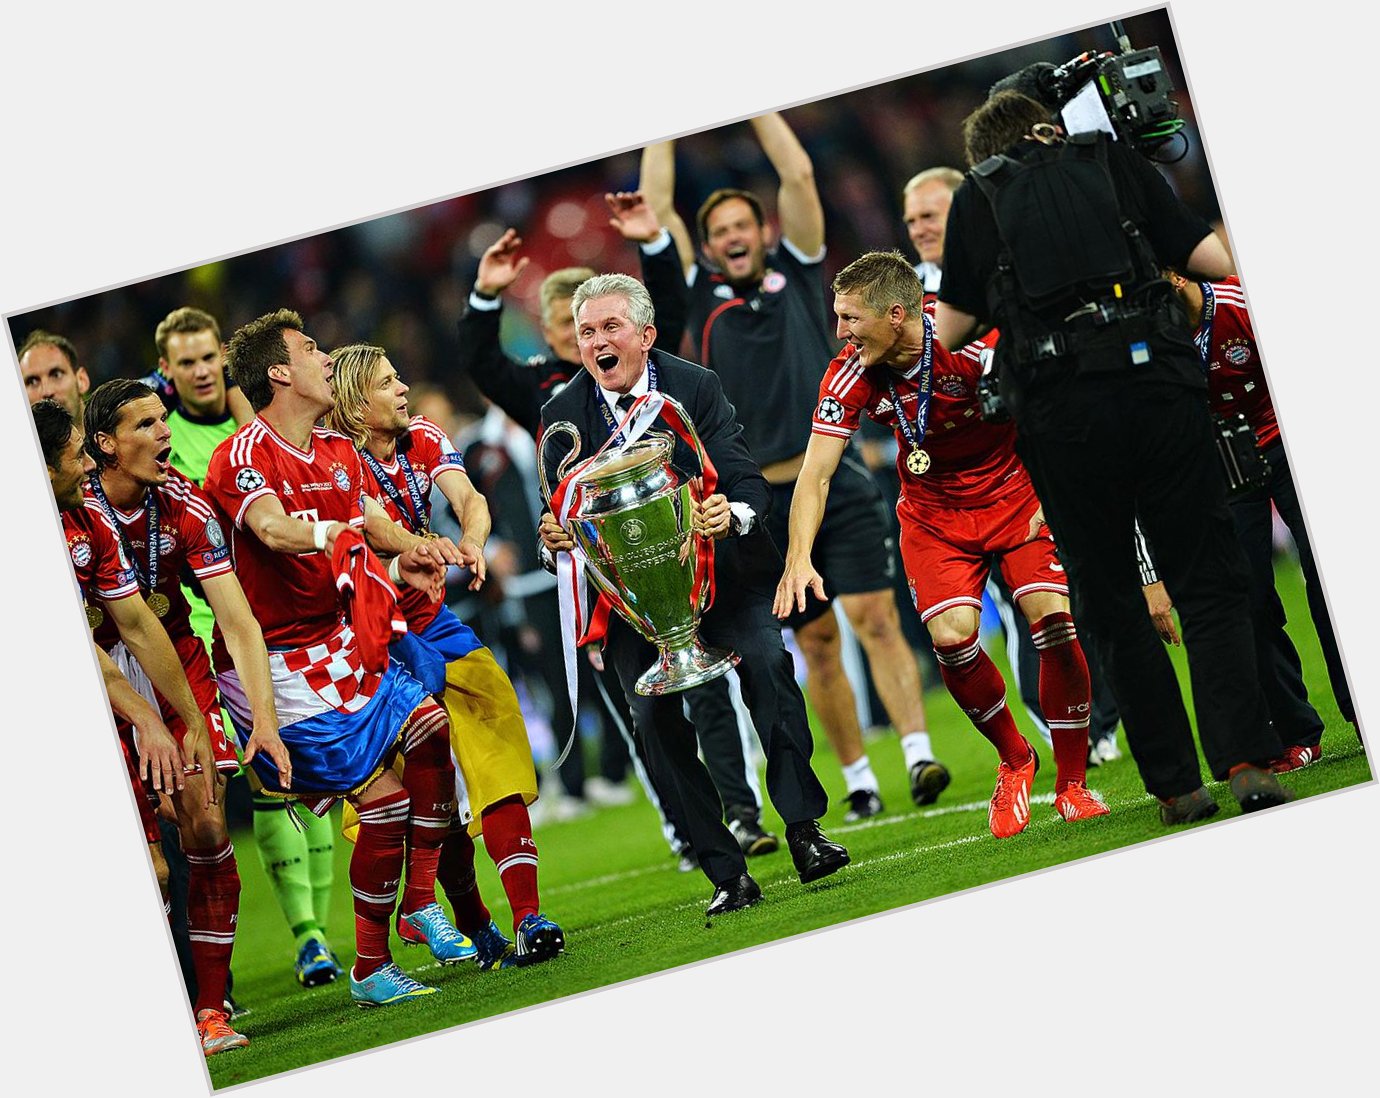 HAPPY 70th BIRTHDAY to legend Jupp Heynckes. The manager who led them to the 2012-13 UCL title. 